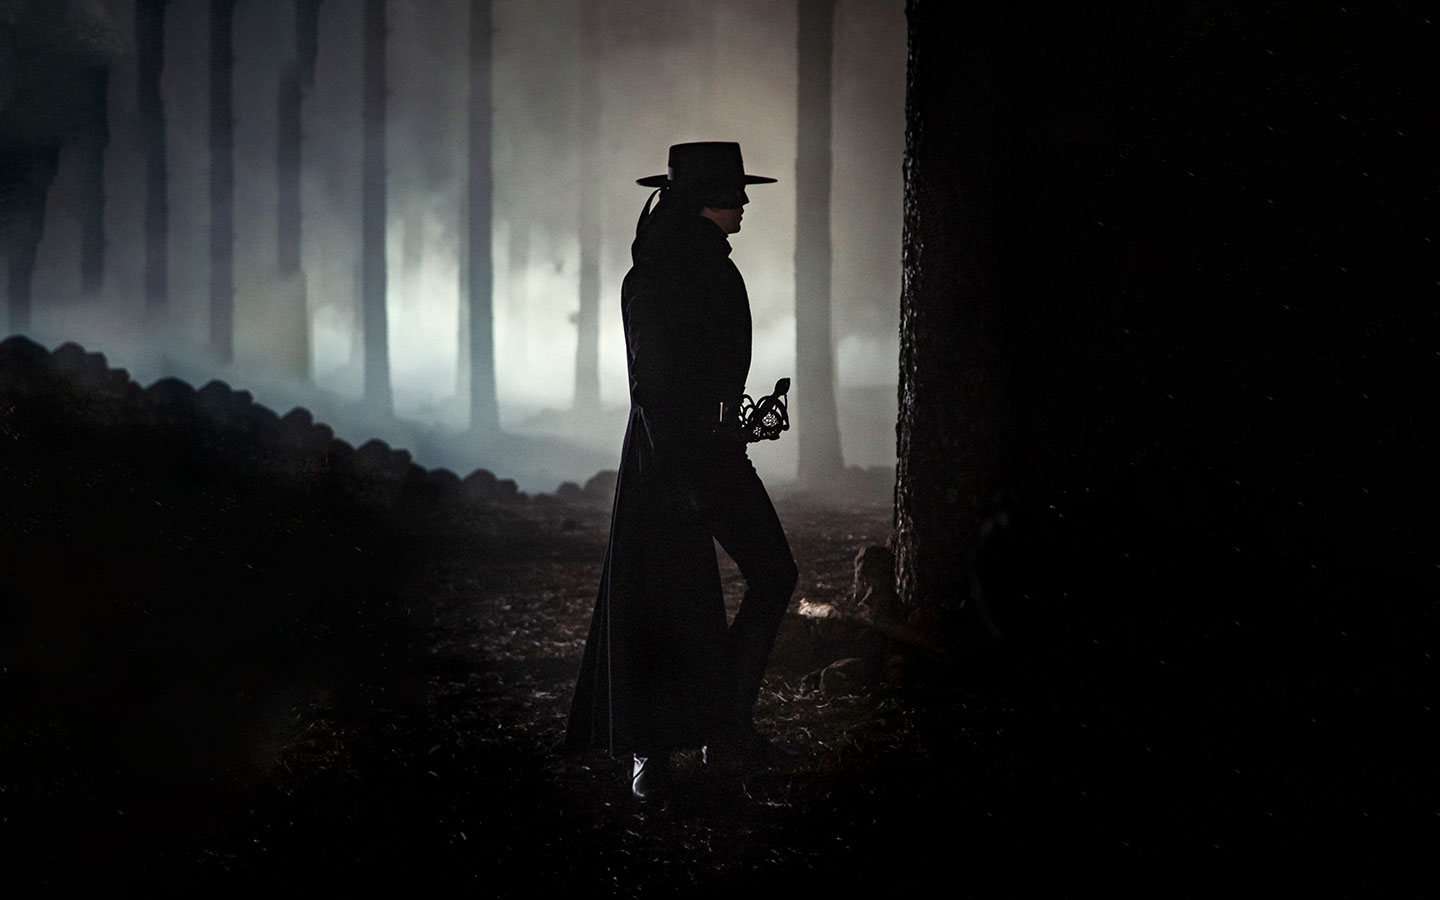 Zorro Revived: First Look At Jean Dujardin As The Masked Vigilante